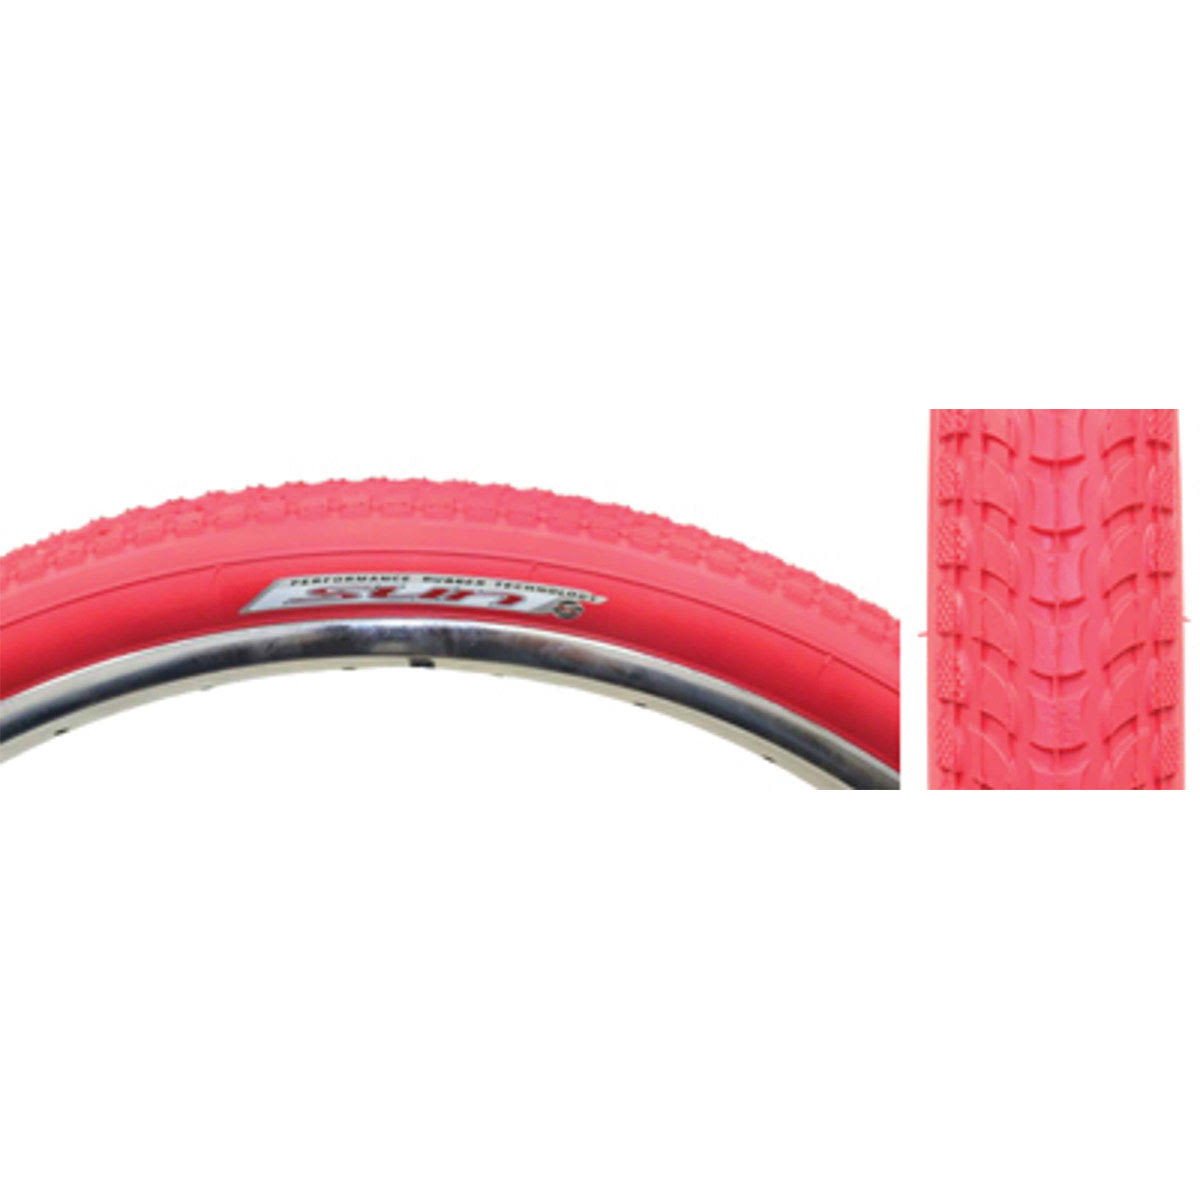 Sunlite Cruiser 927 Tires - 26"x2.125", Red/Red